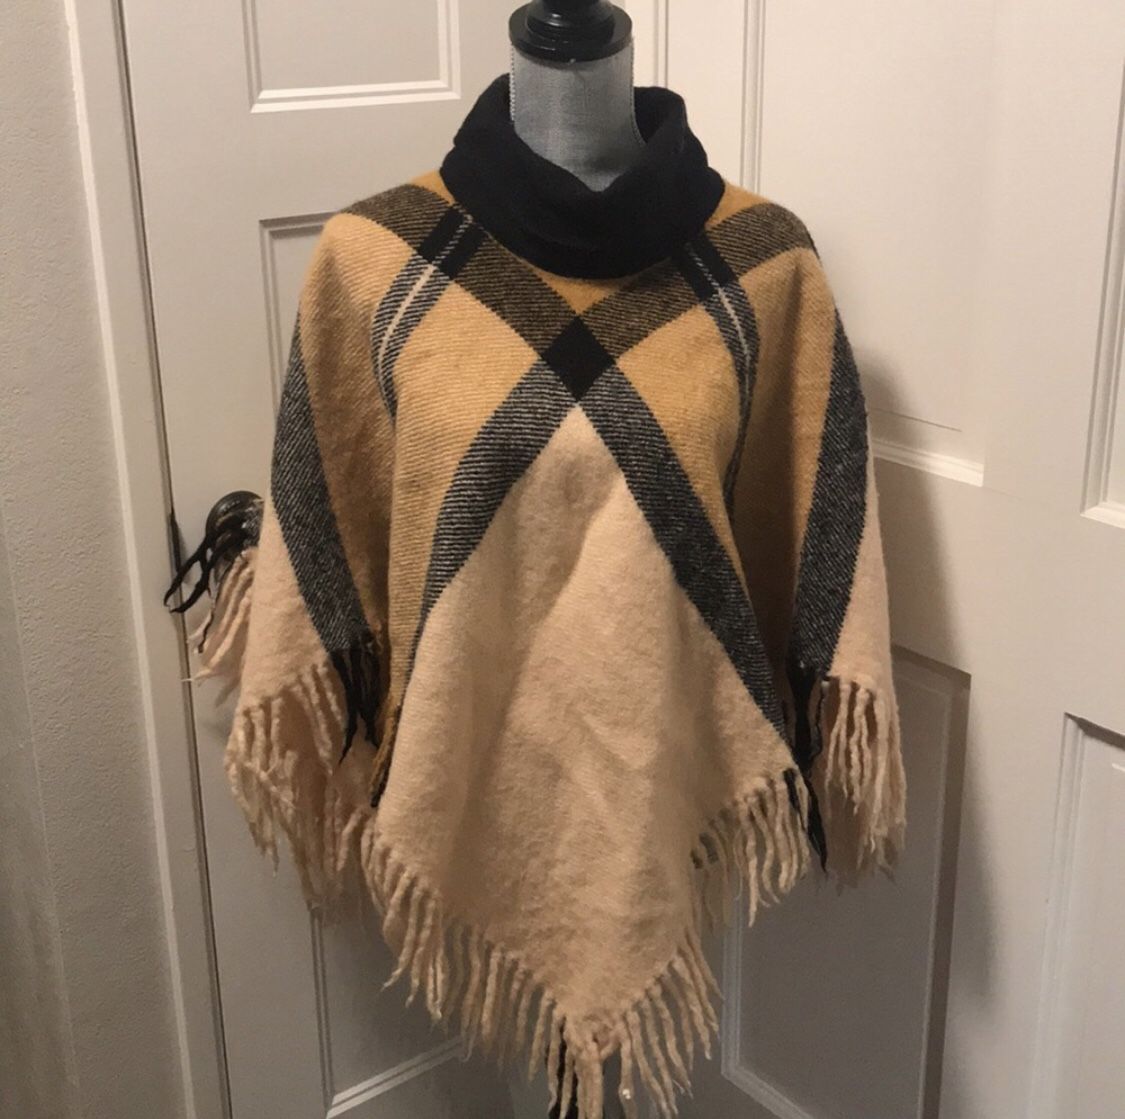 100% Wool poncho made in Finland Cape Burberry print winter jacket warm